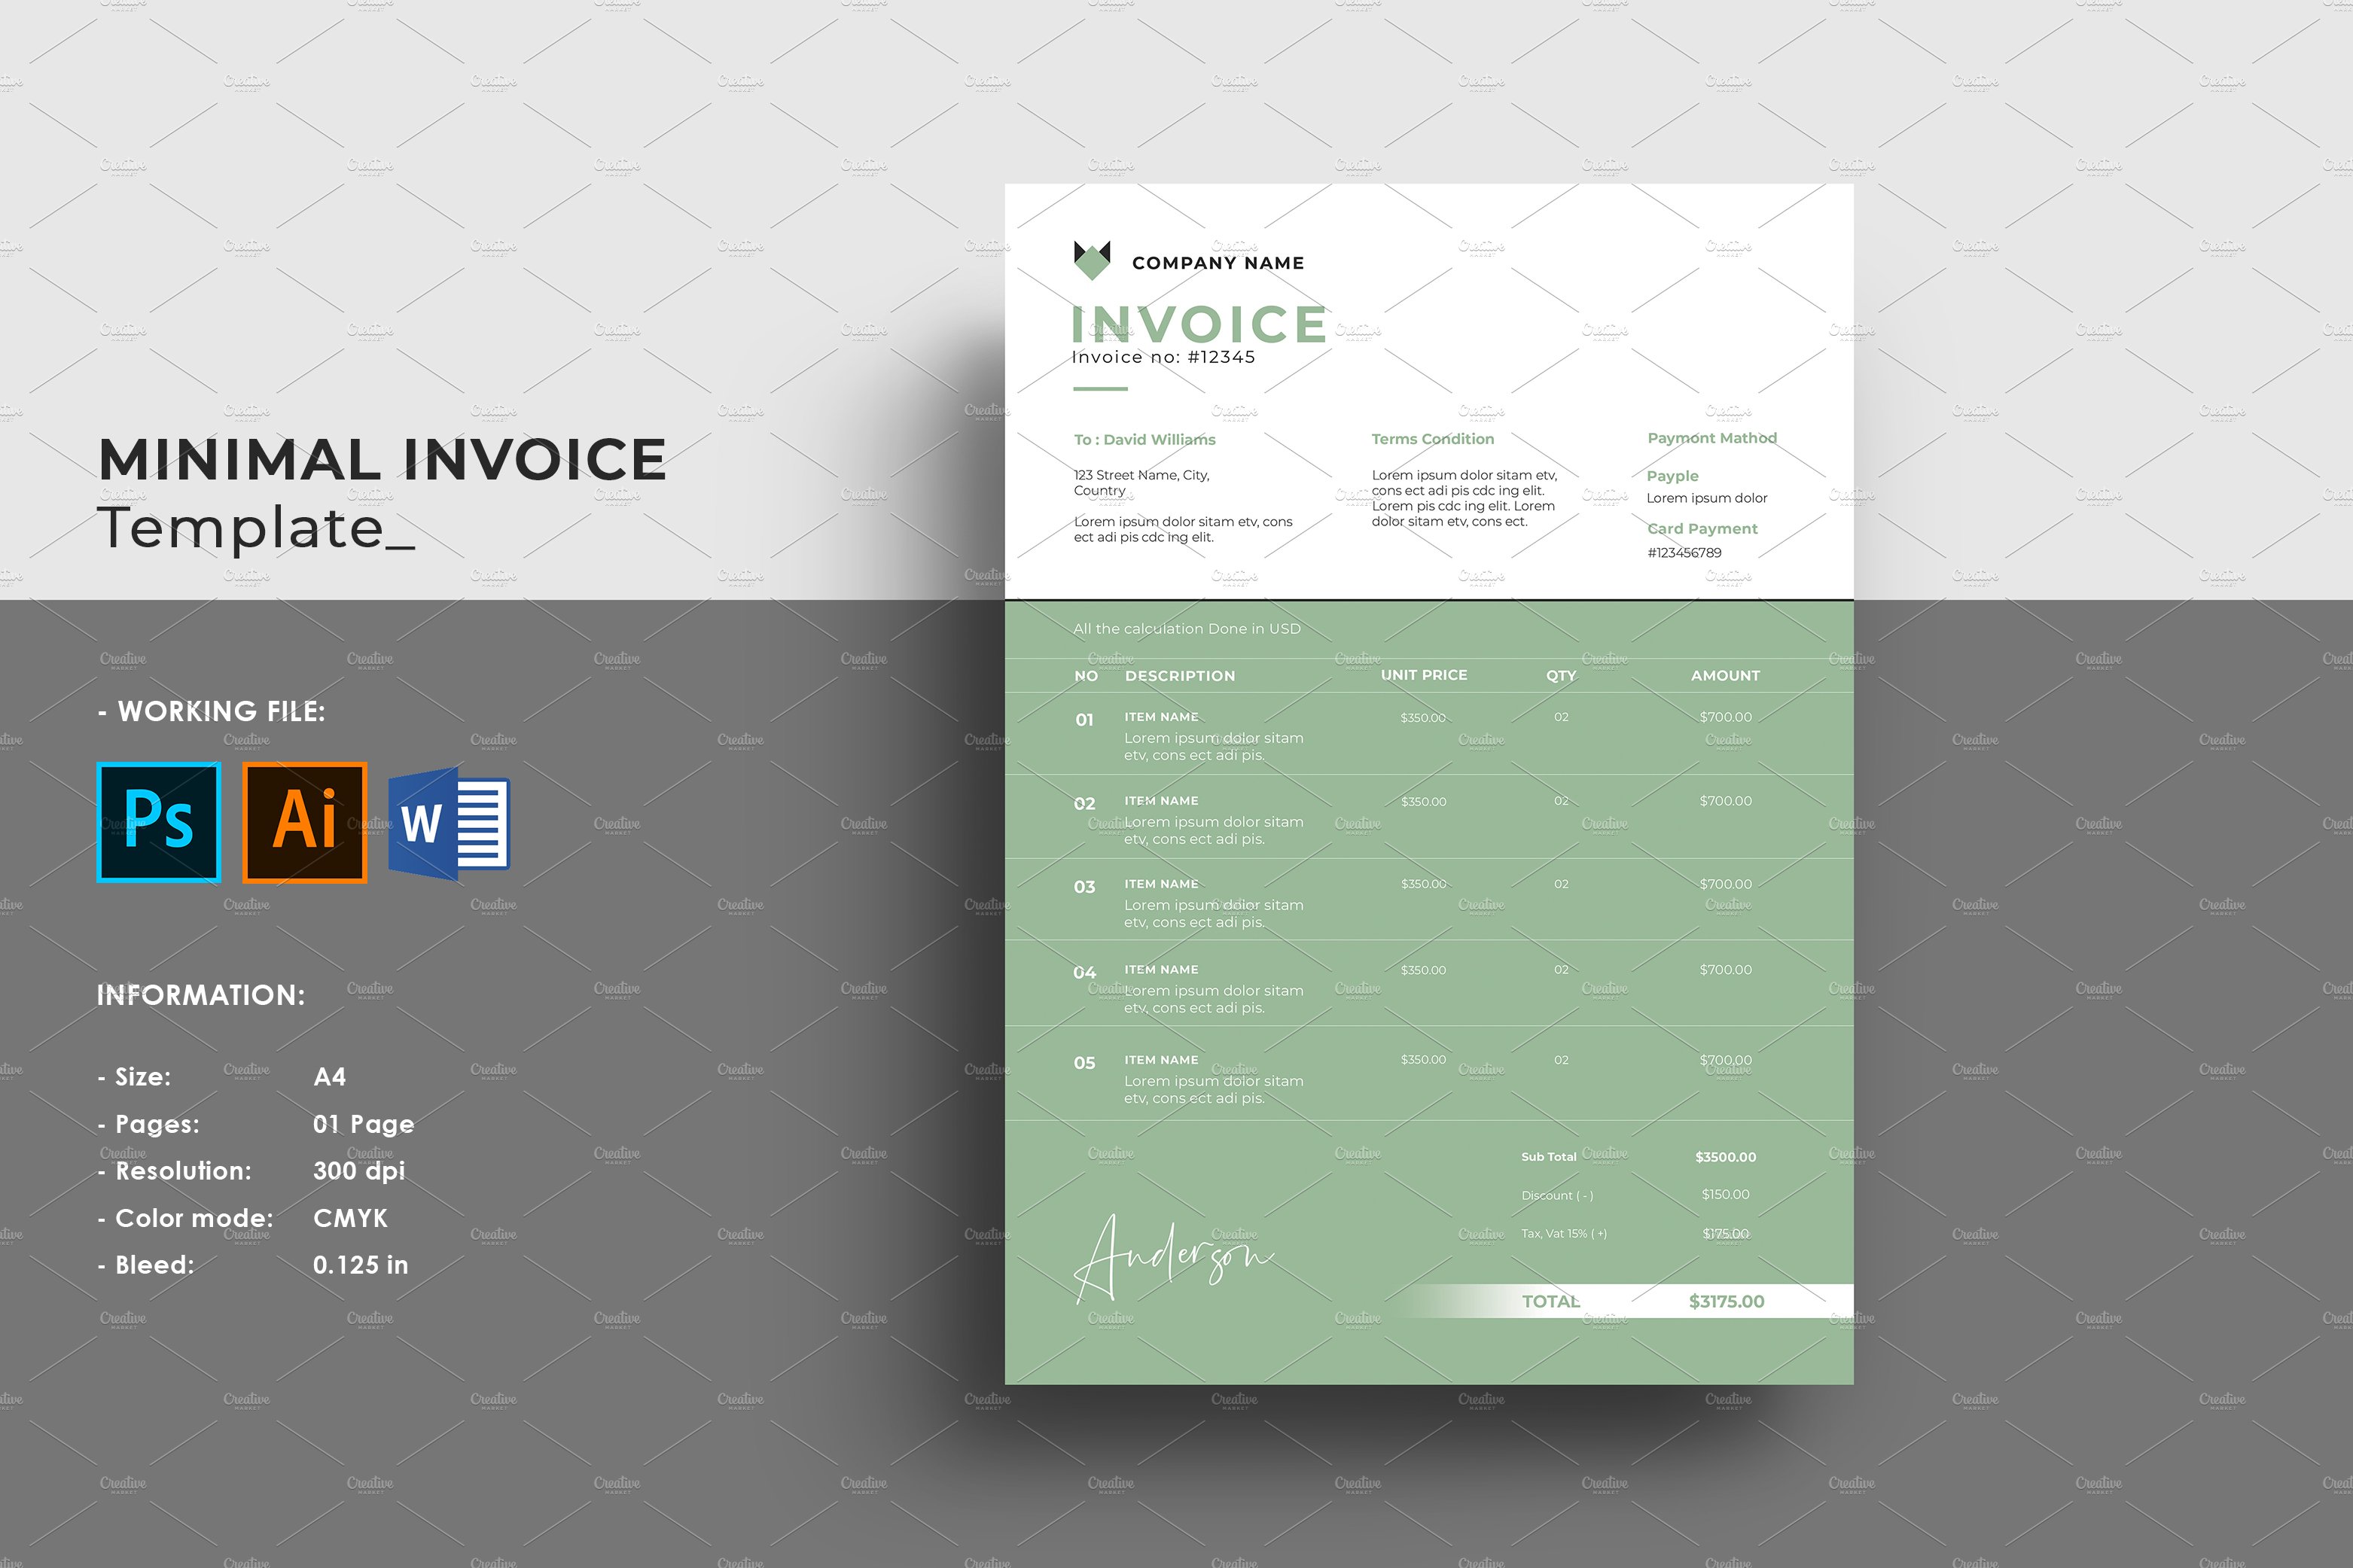 Invoice Template V27 cover image.